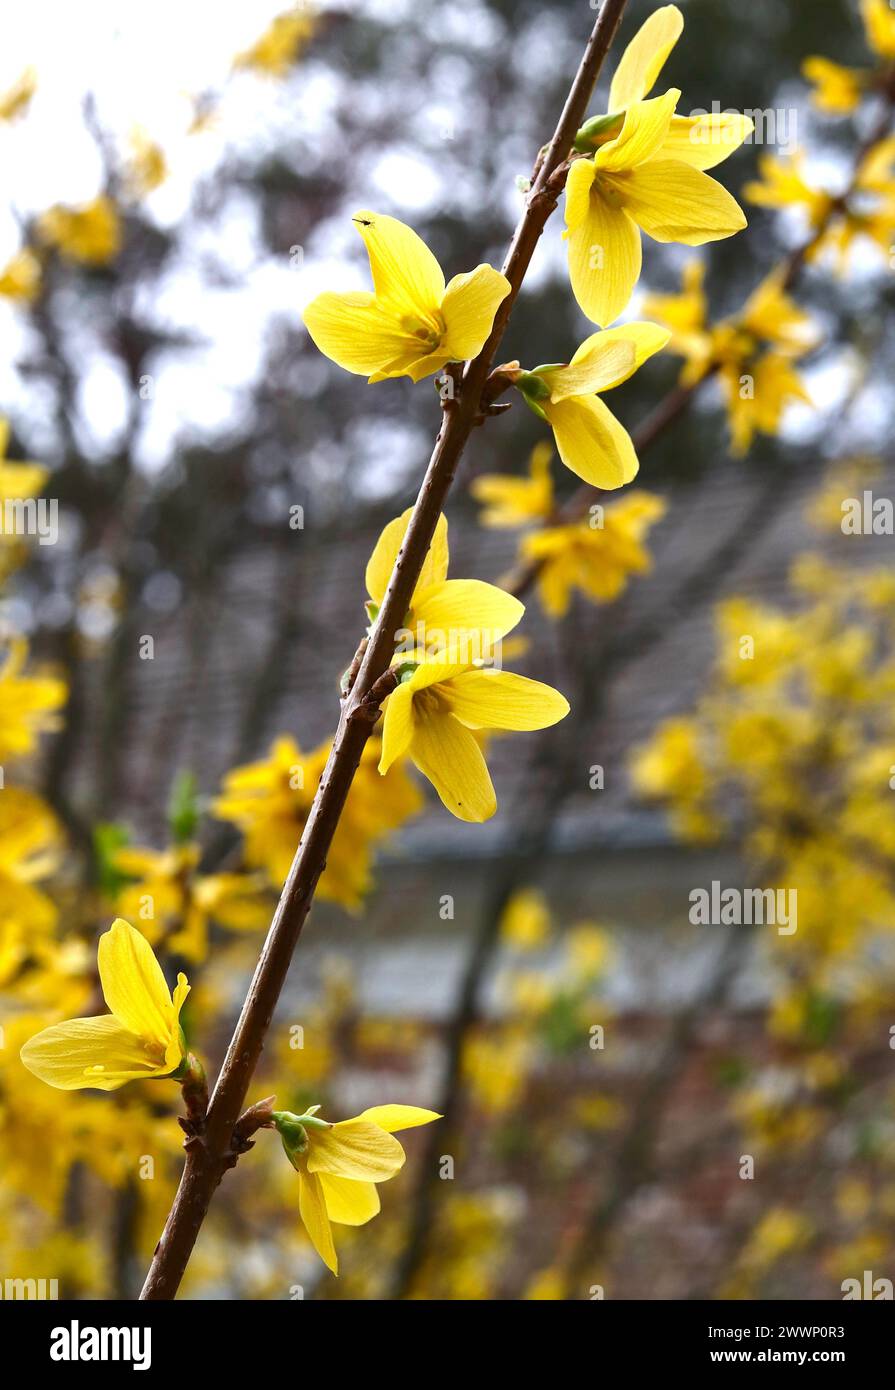 Forsythia Branch With Yellow Blossoms Stock Photo